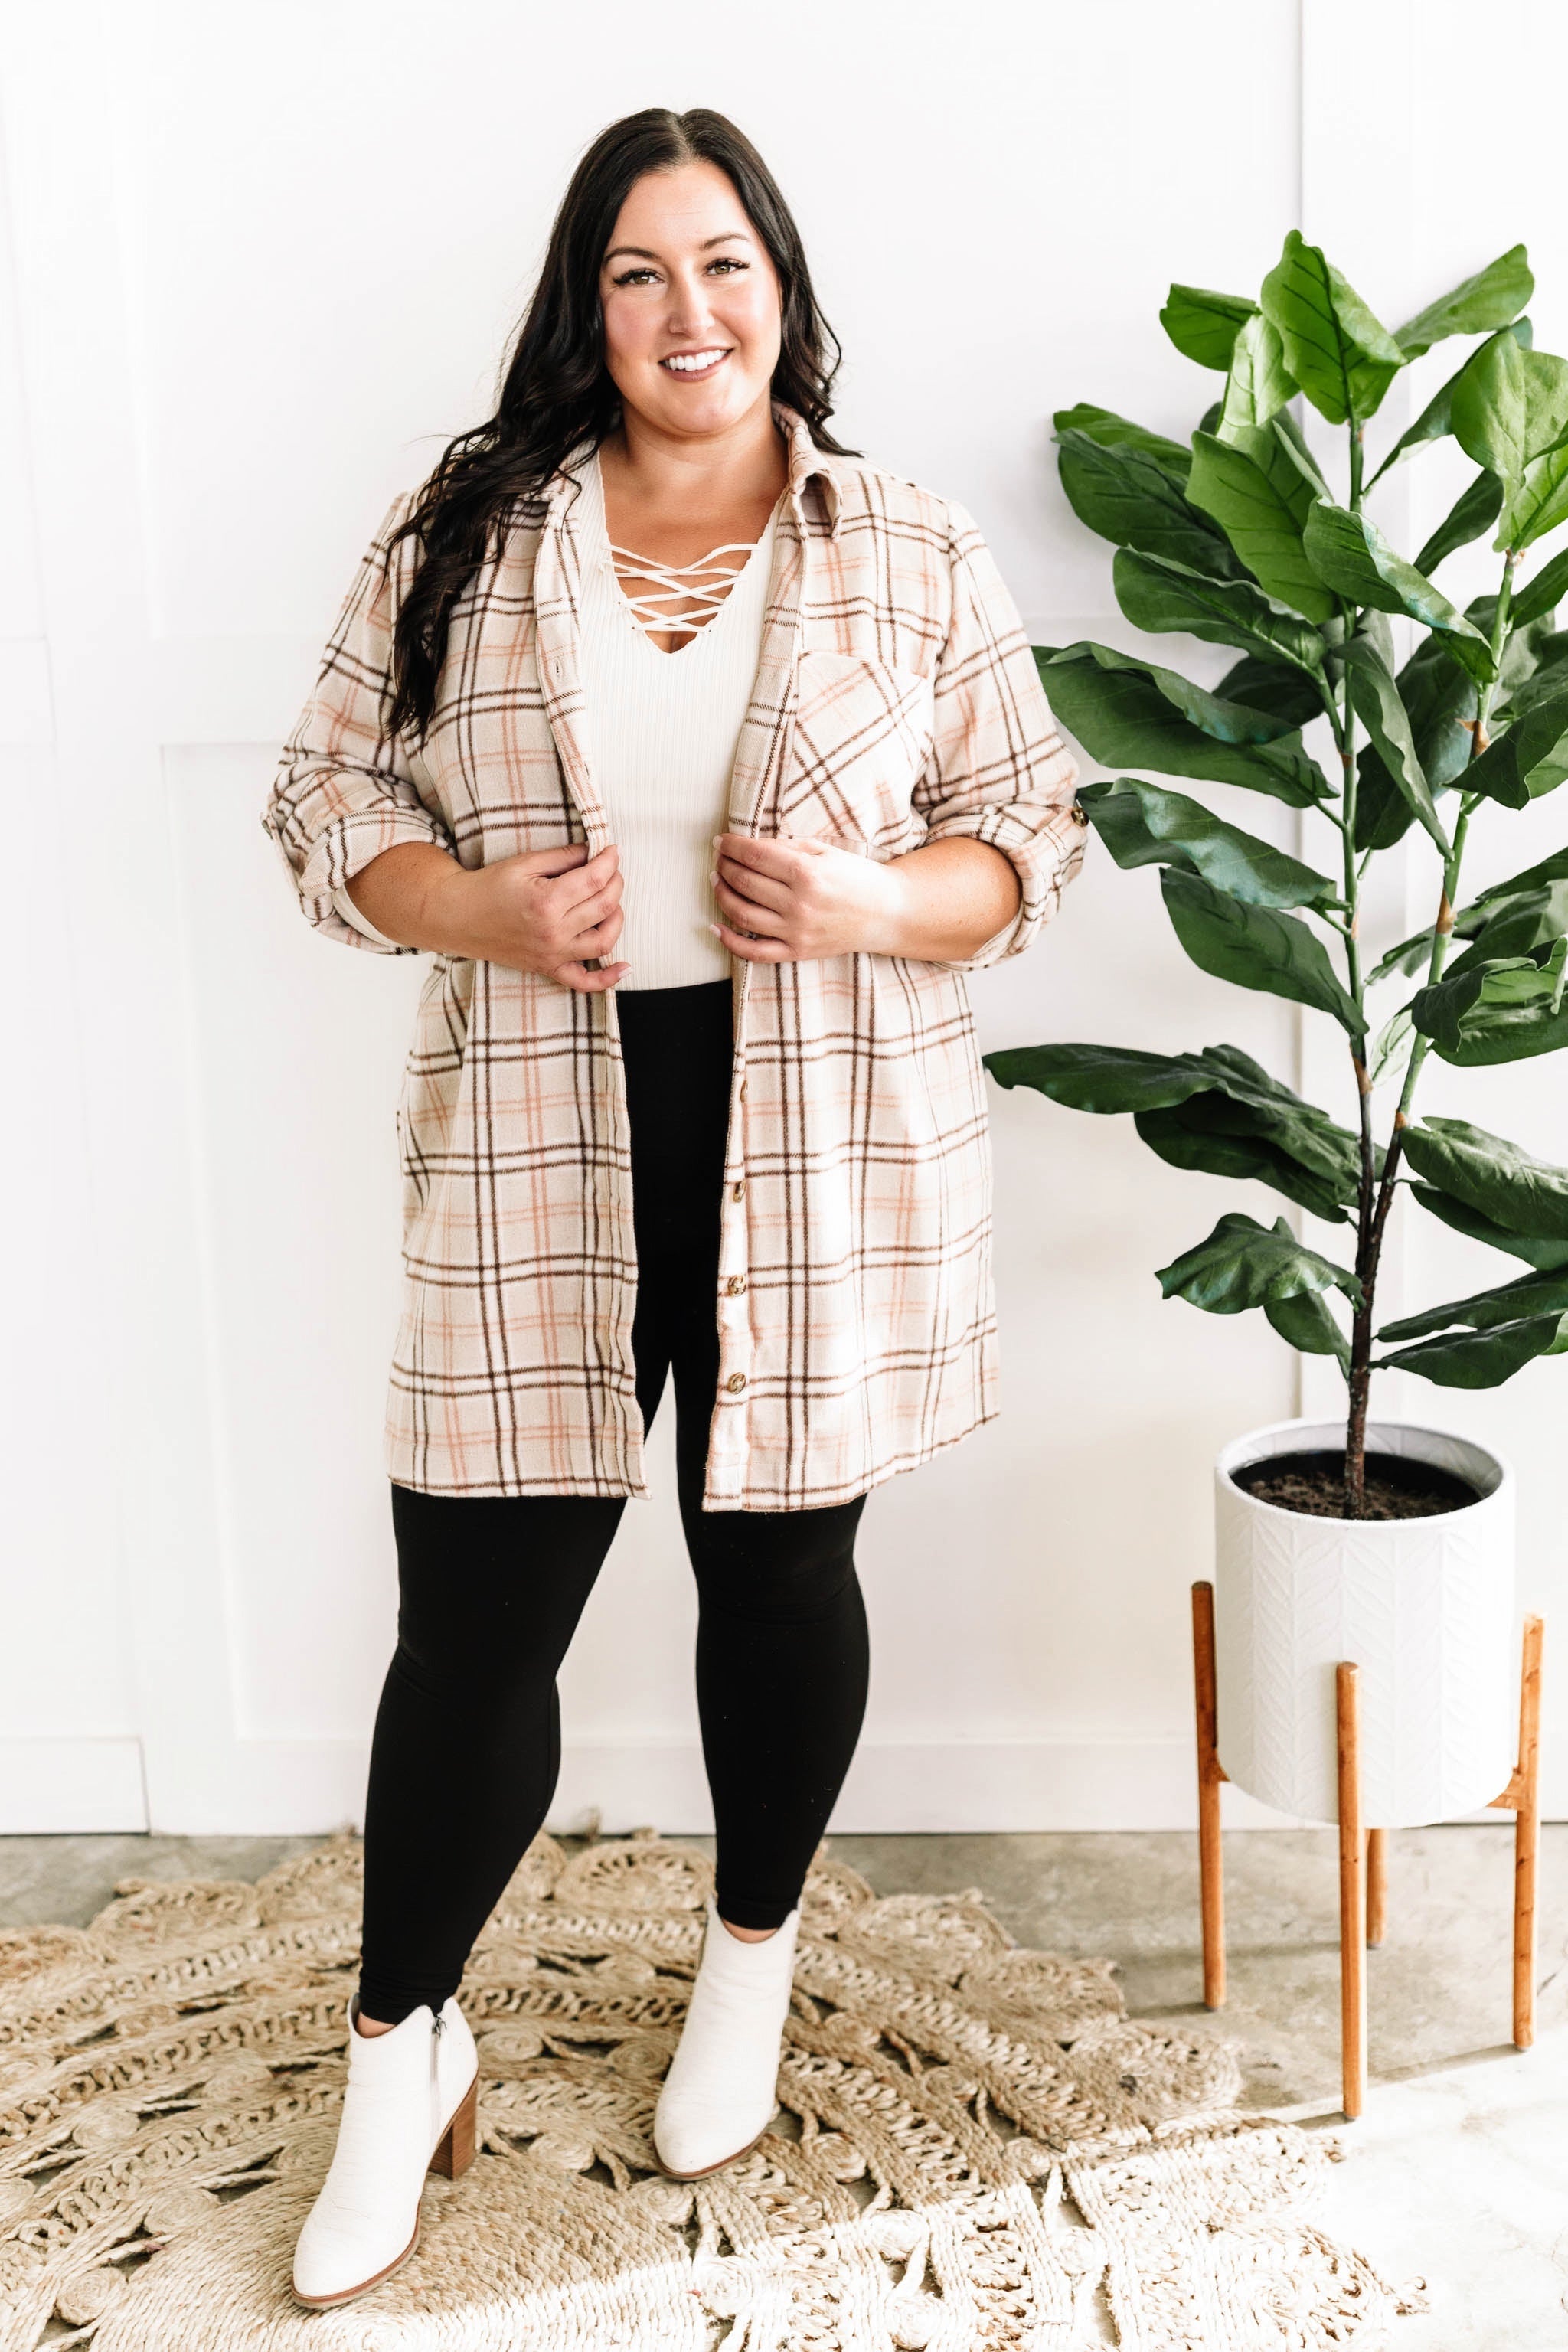 11.1 Plaid Button Up Tunic In Beige & Pink